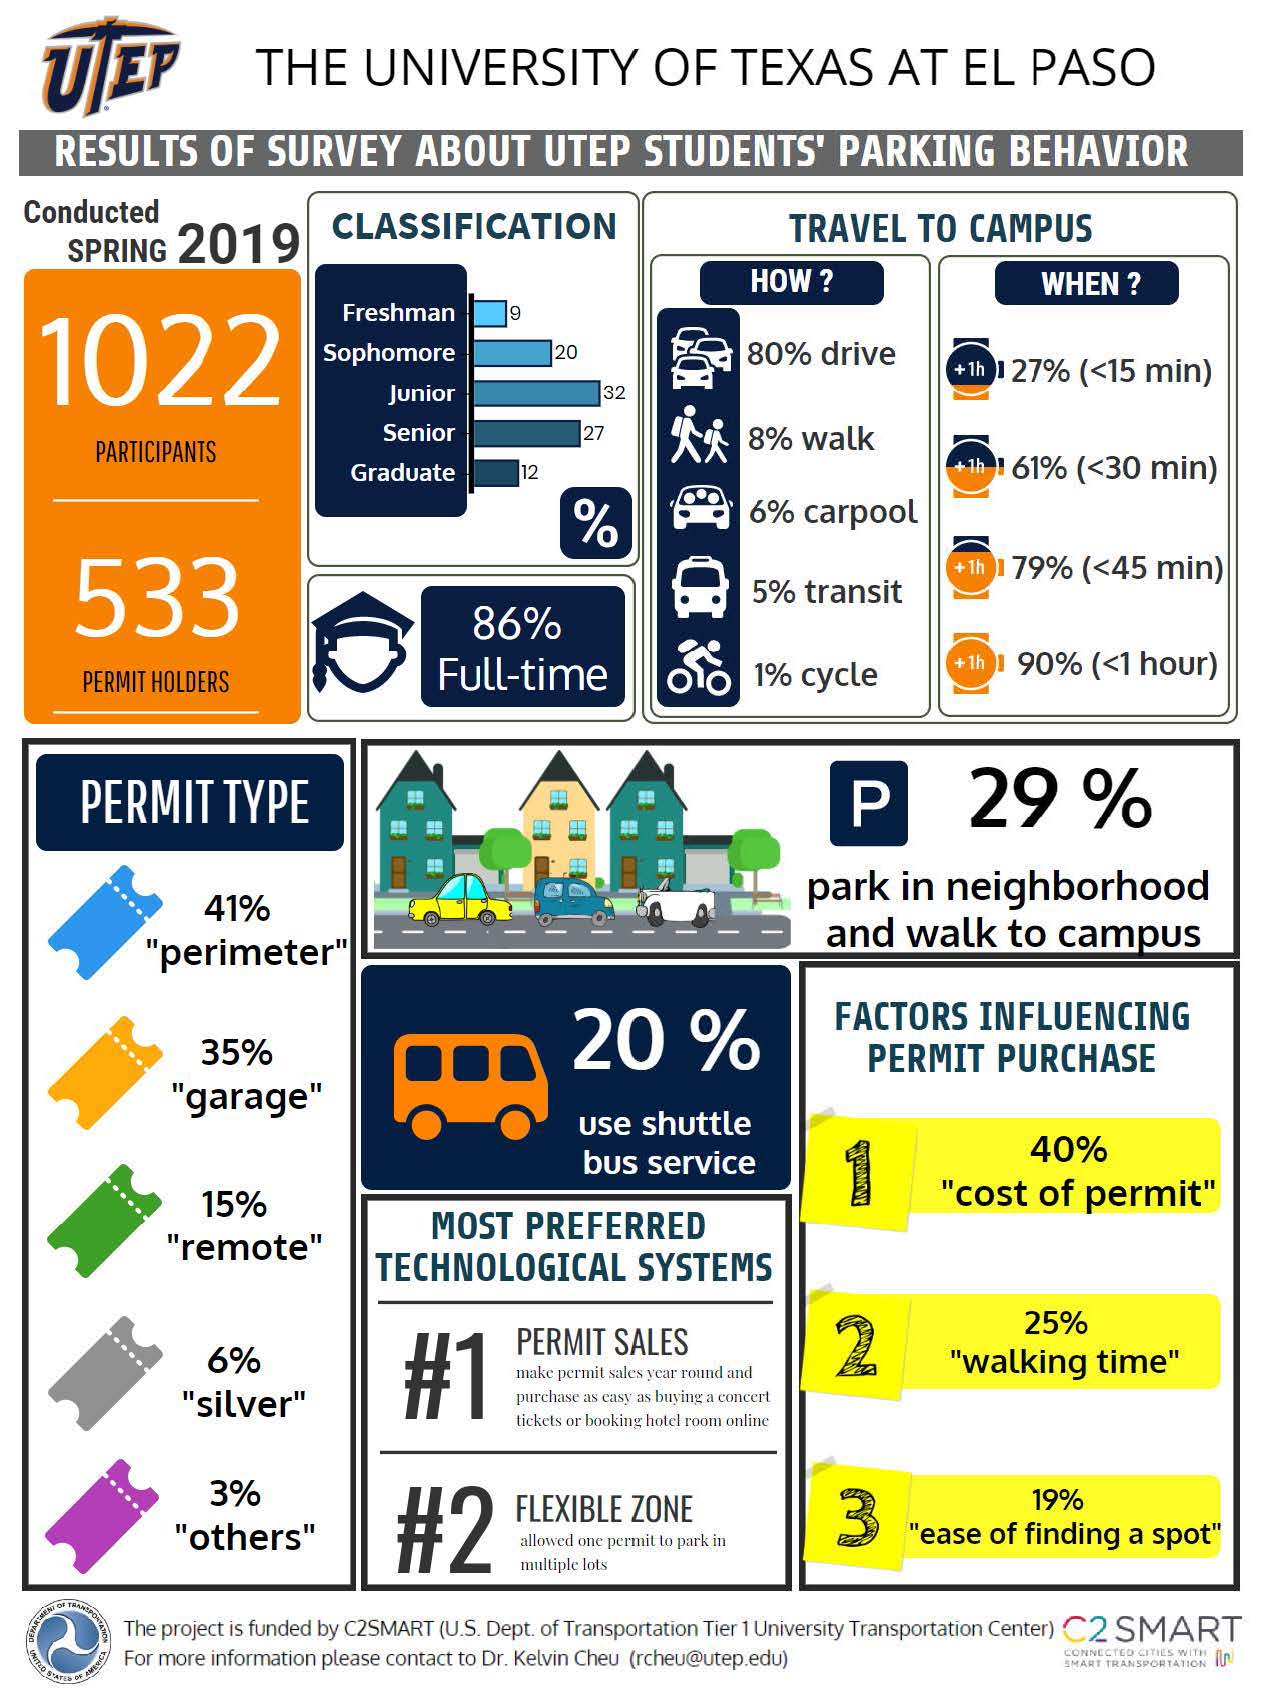 Results of Survey about UTEP Students' Parking Behavior